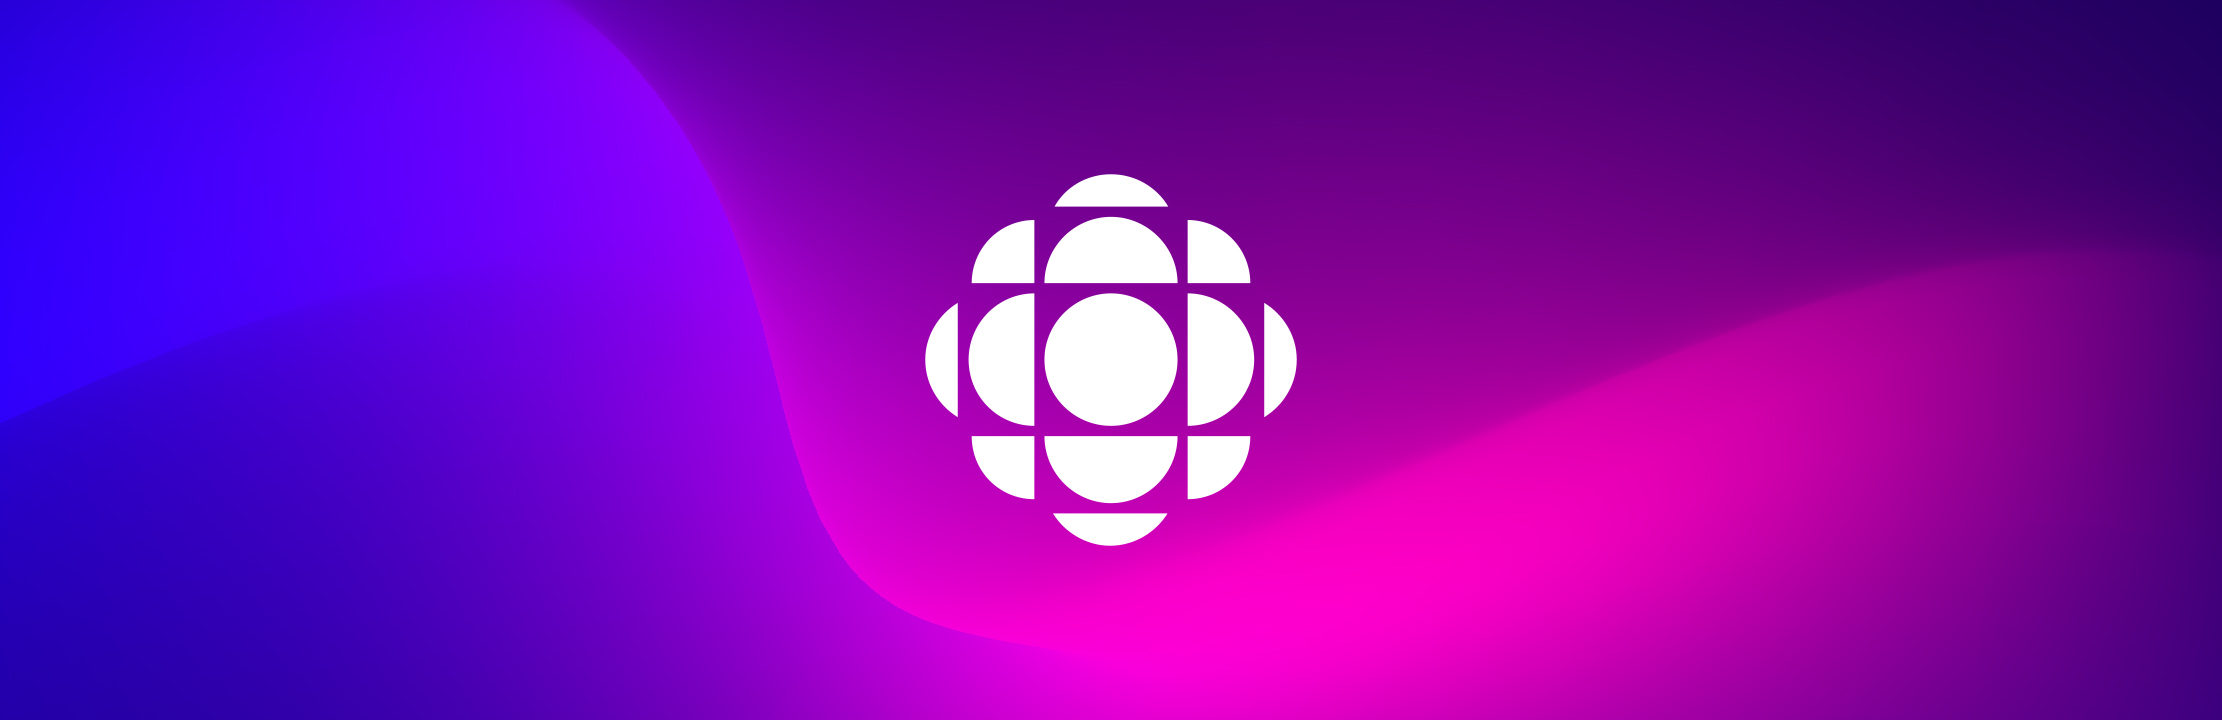 Underinddel Fortælle Kirurgi CBC/Radio-Canada's third 2018-2019 quarterly report now available online -  CBC/Radio-Canada